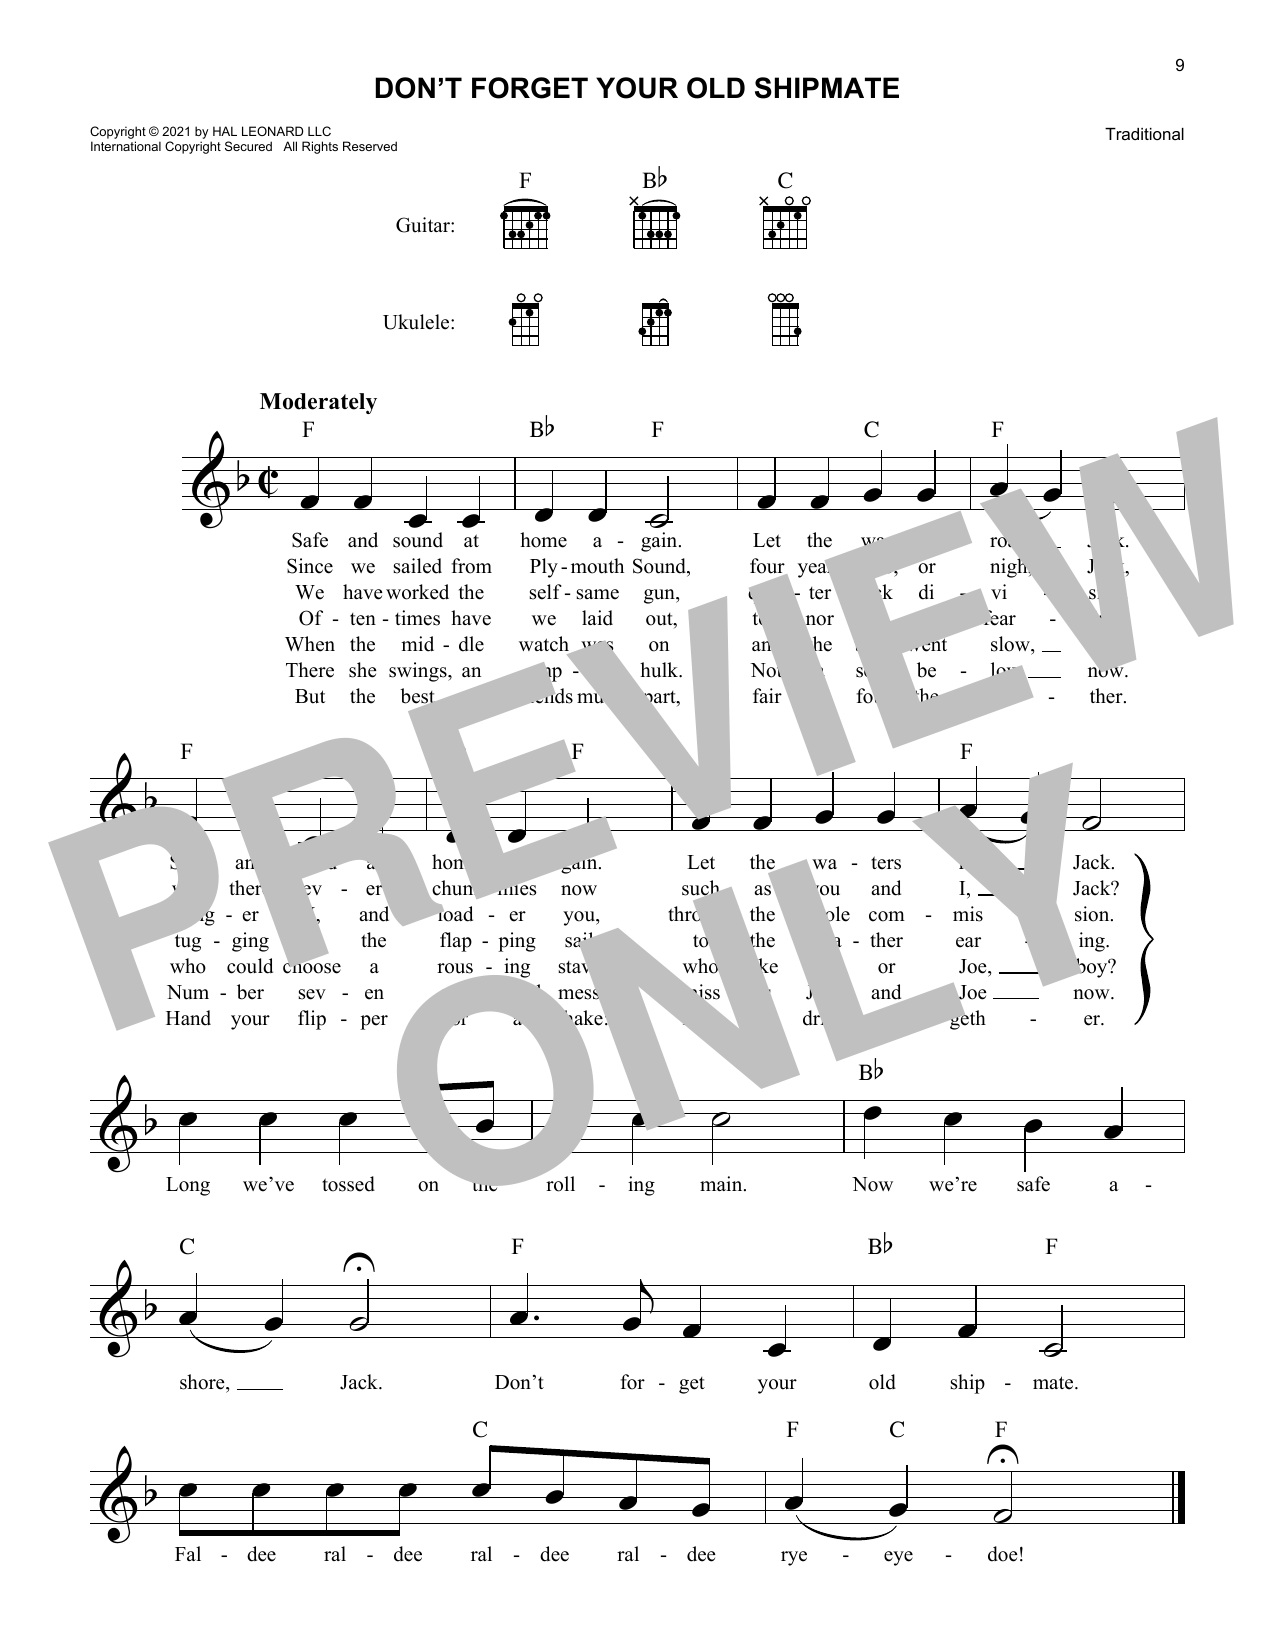 Download Traditional Don't Forget Your Old Shipmate Sheet Music